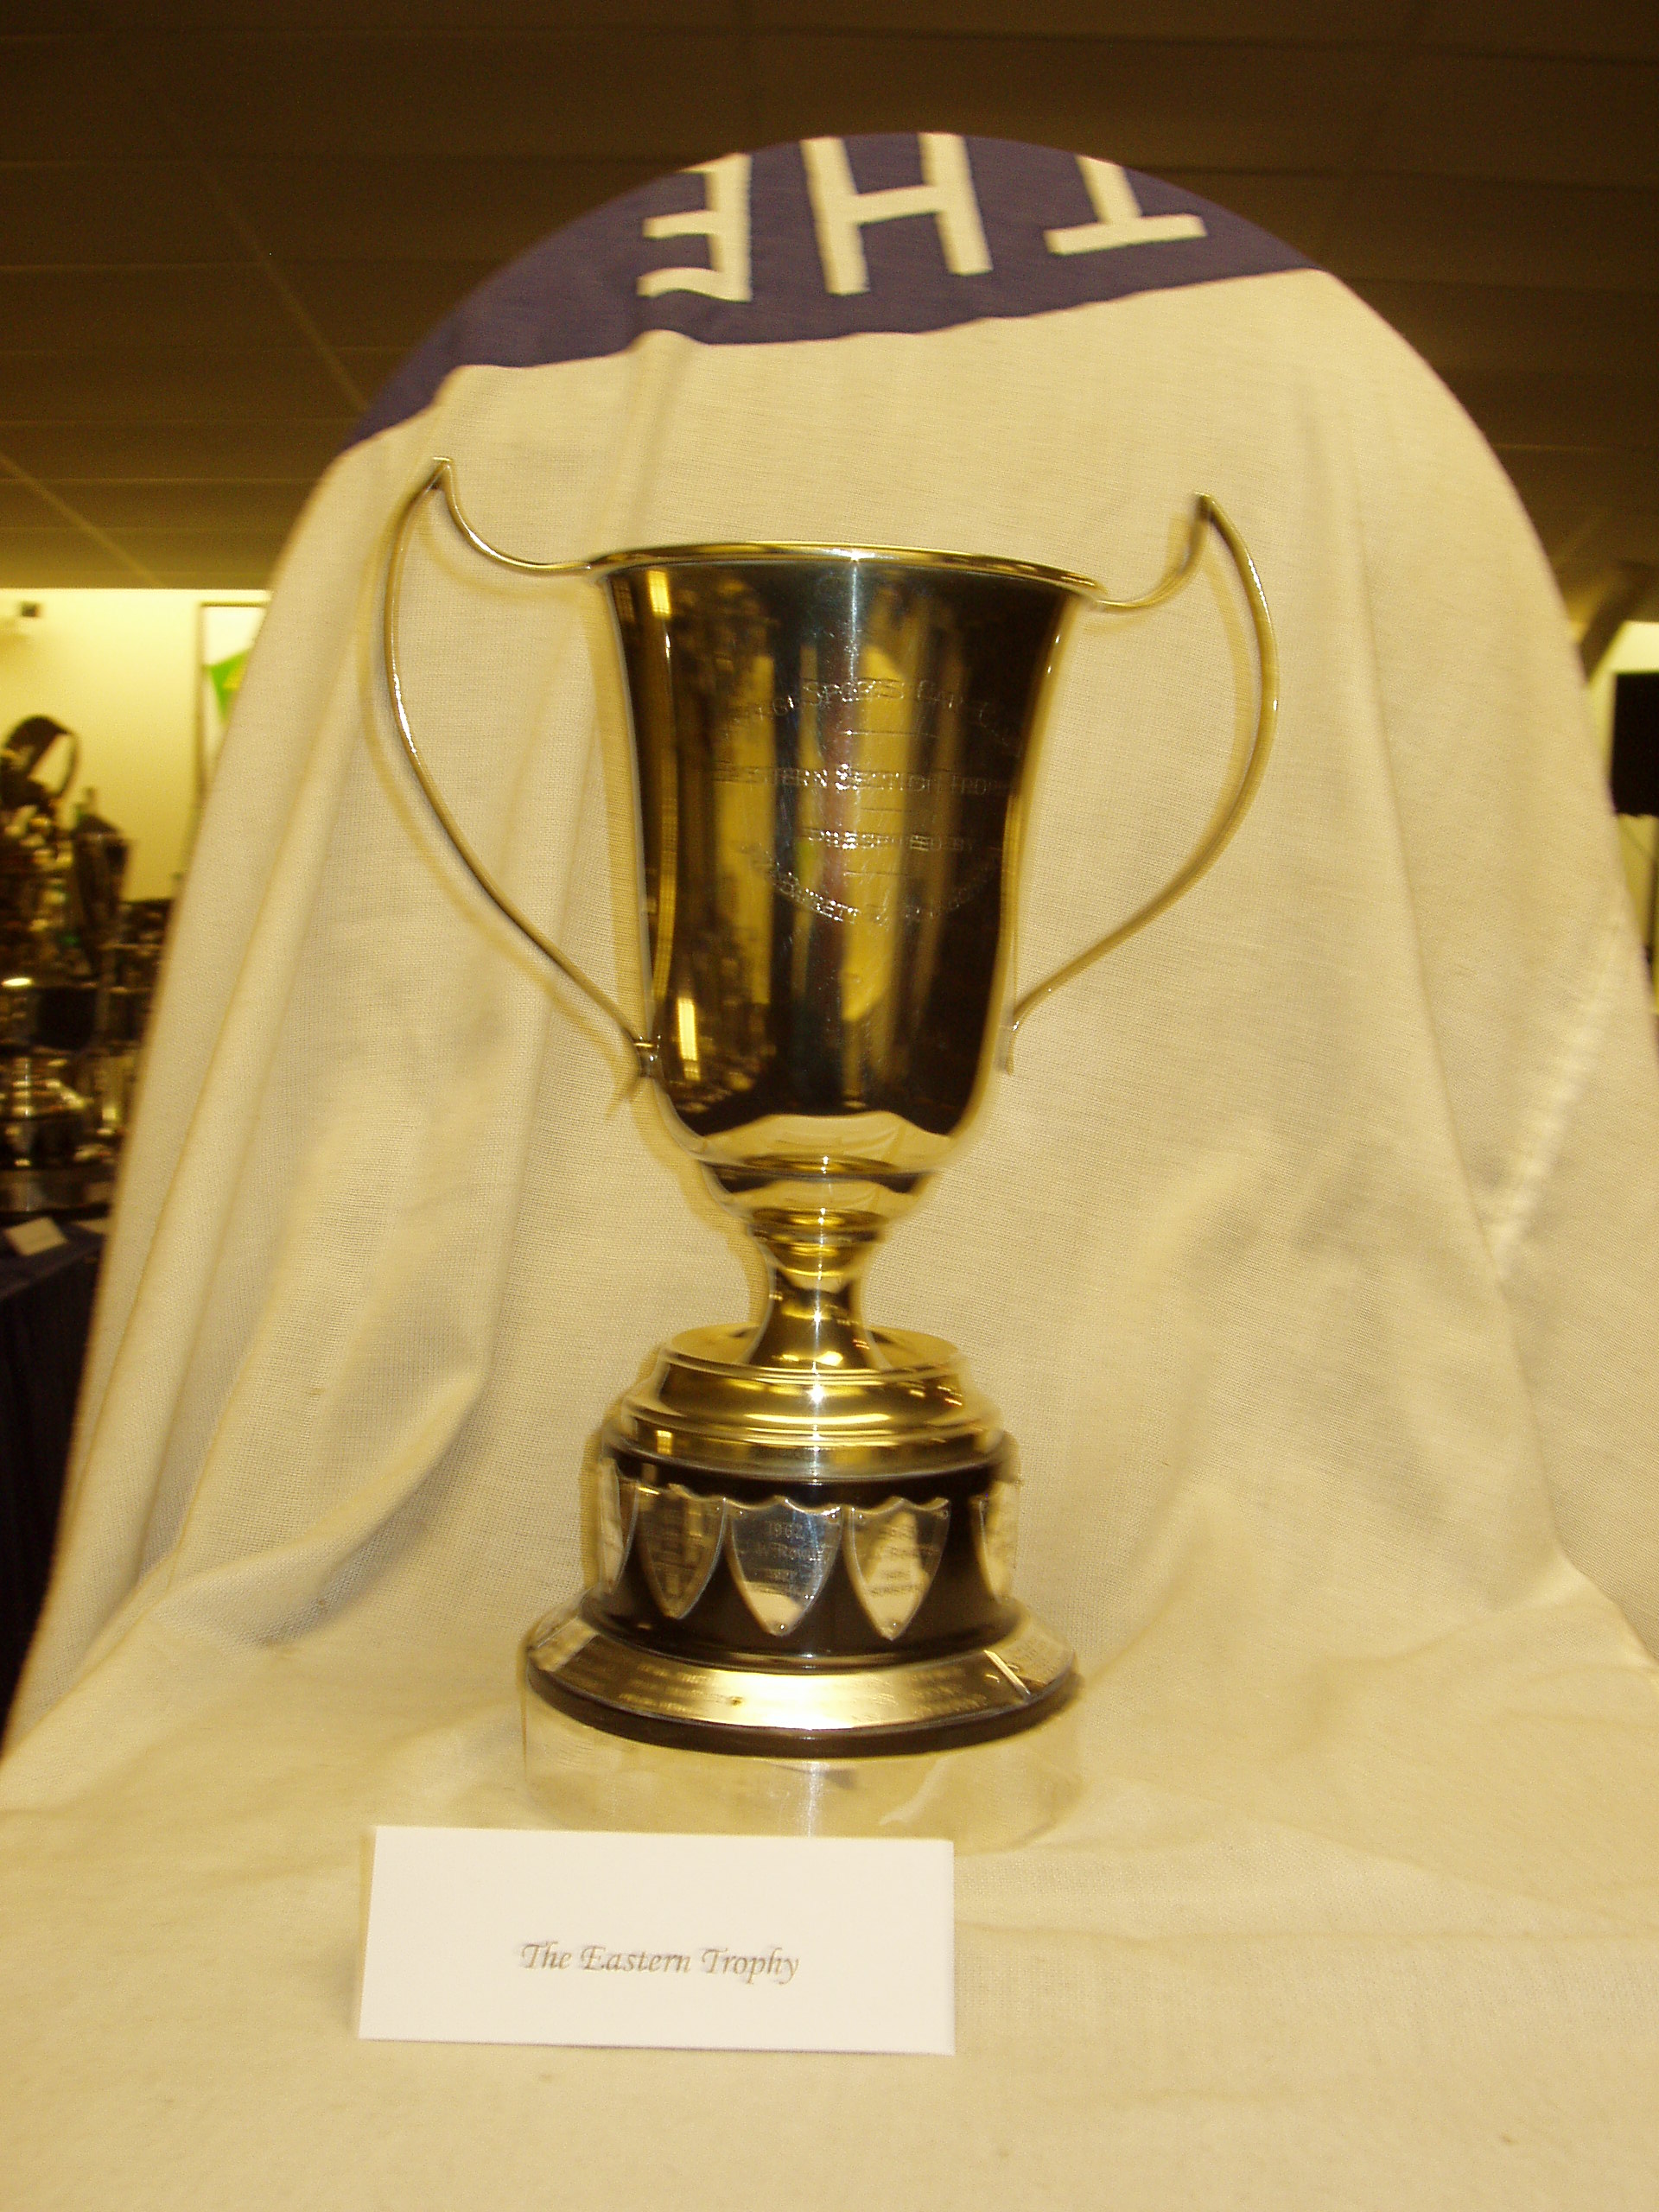 EASTERN TROPHY cover